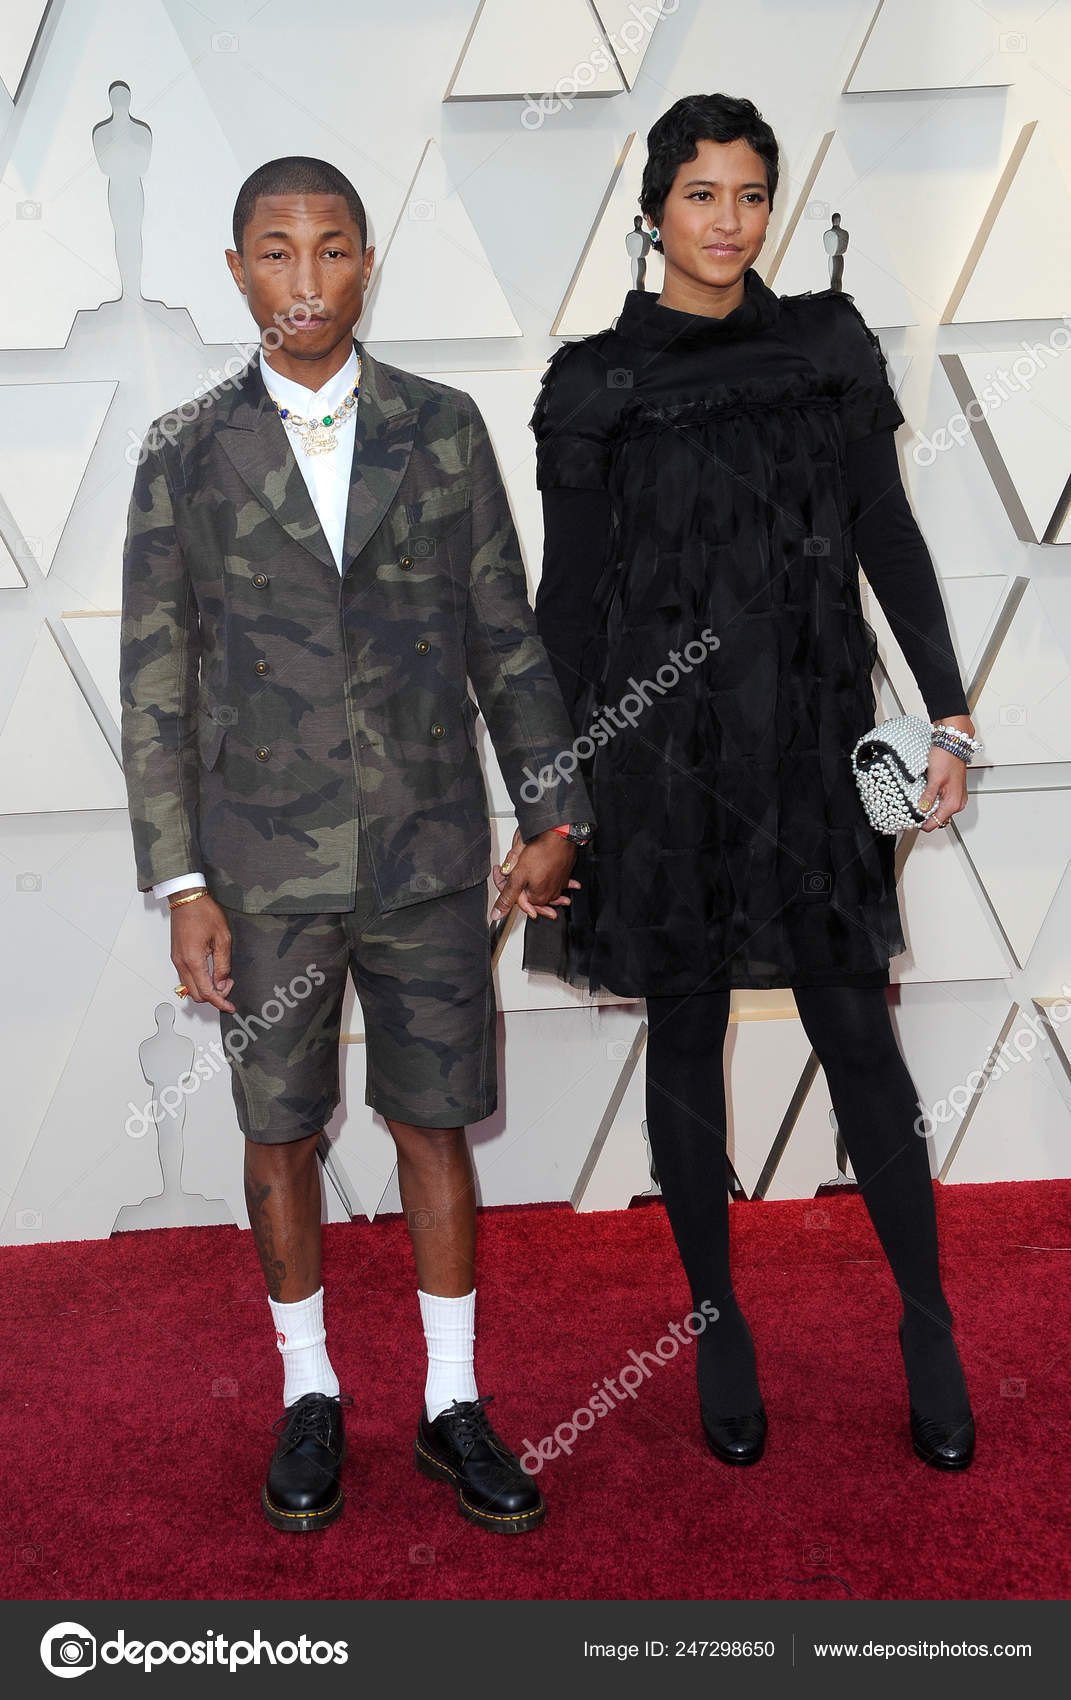 Helen Lasichanh, Pharrell Williams 199 at the 57th Annual GRAMMY Awards at  the Staples Center in Los Angeles. February 8, 2015.Helen Lasichanh, Pharrell  Williams 199 ------------- Red Carpet Event, Vertical, USA, Film